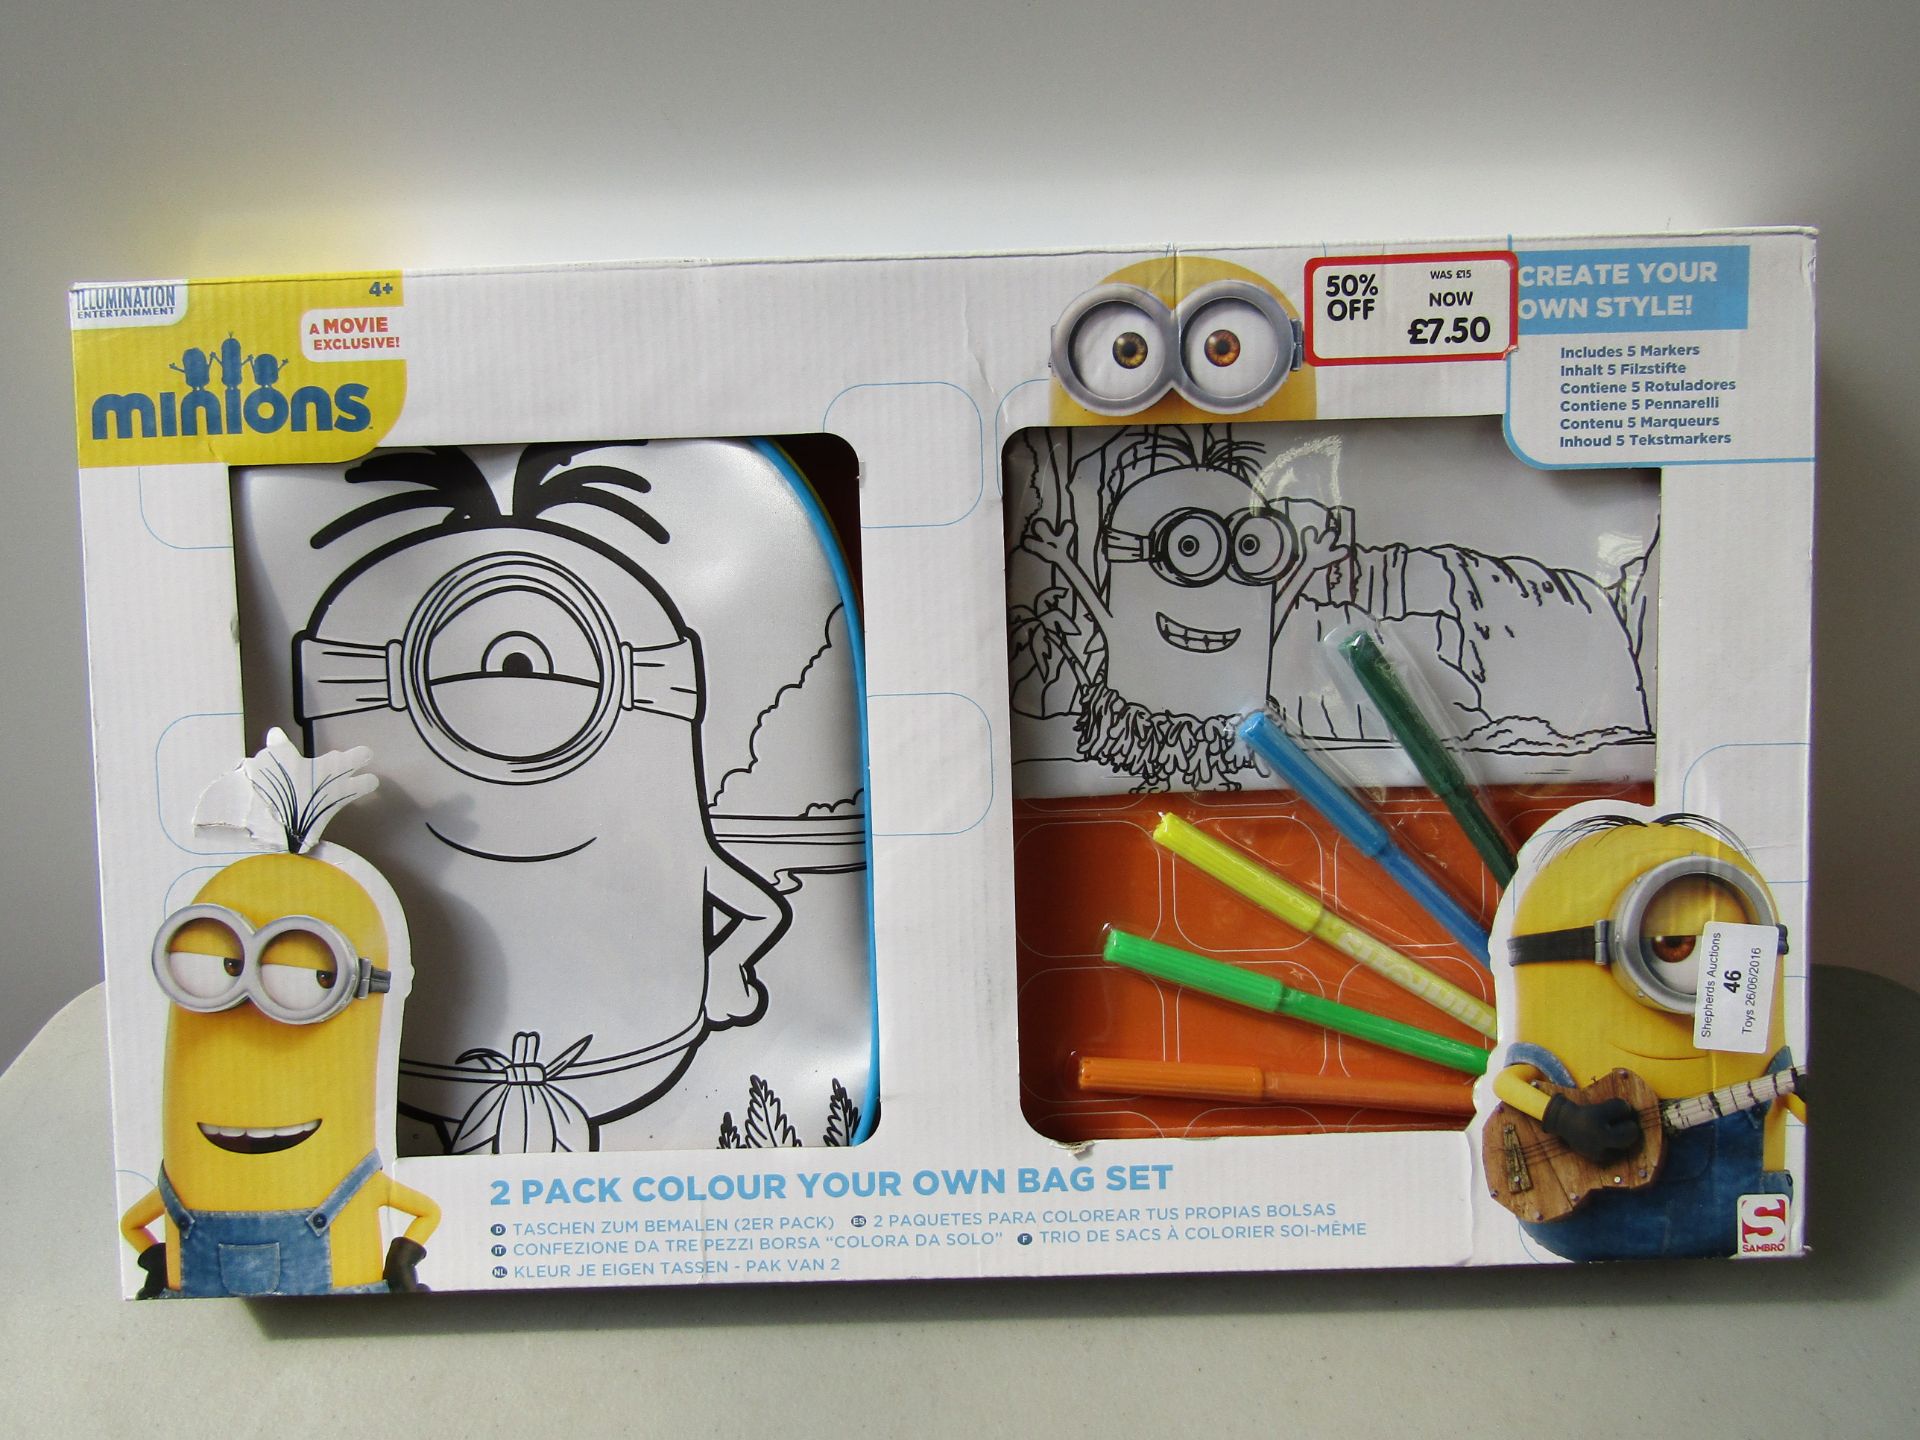 Minions 2 Pack Colour Your Own Bag Set. Boxed.